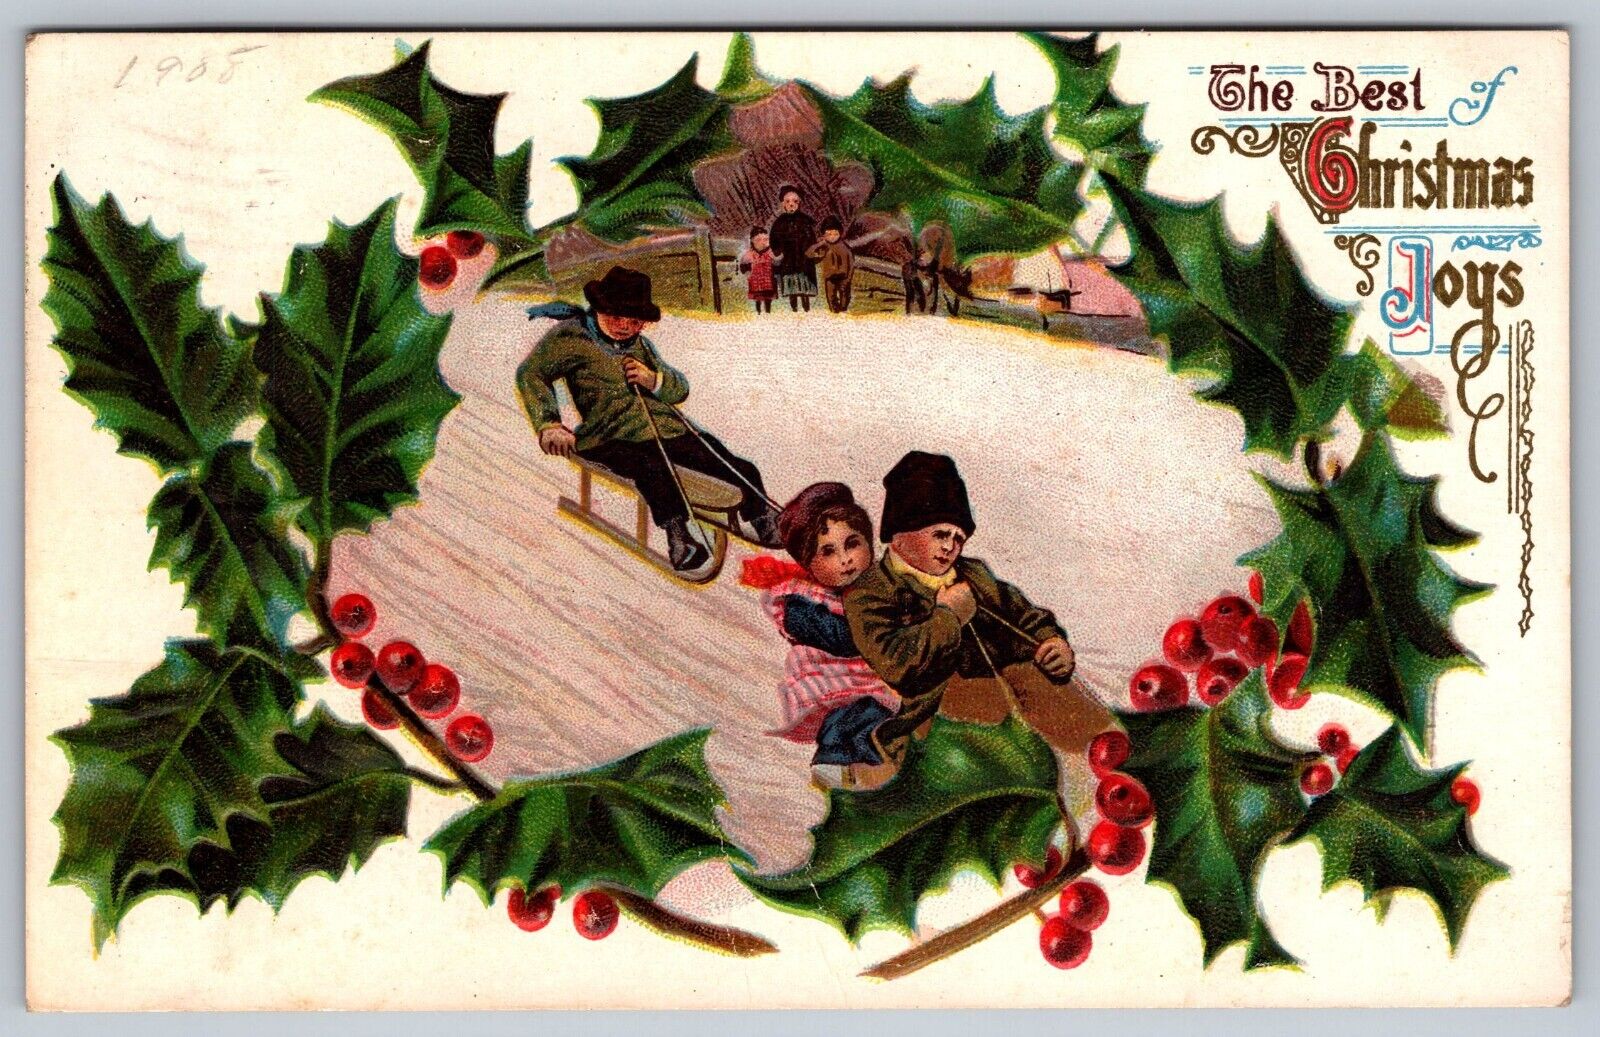 The Best Christmas Joys Postcard: Children on Sleds Posted Waco, TX 1908